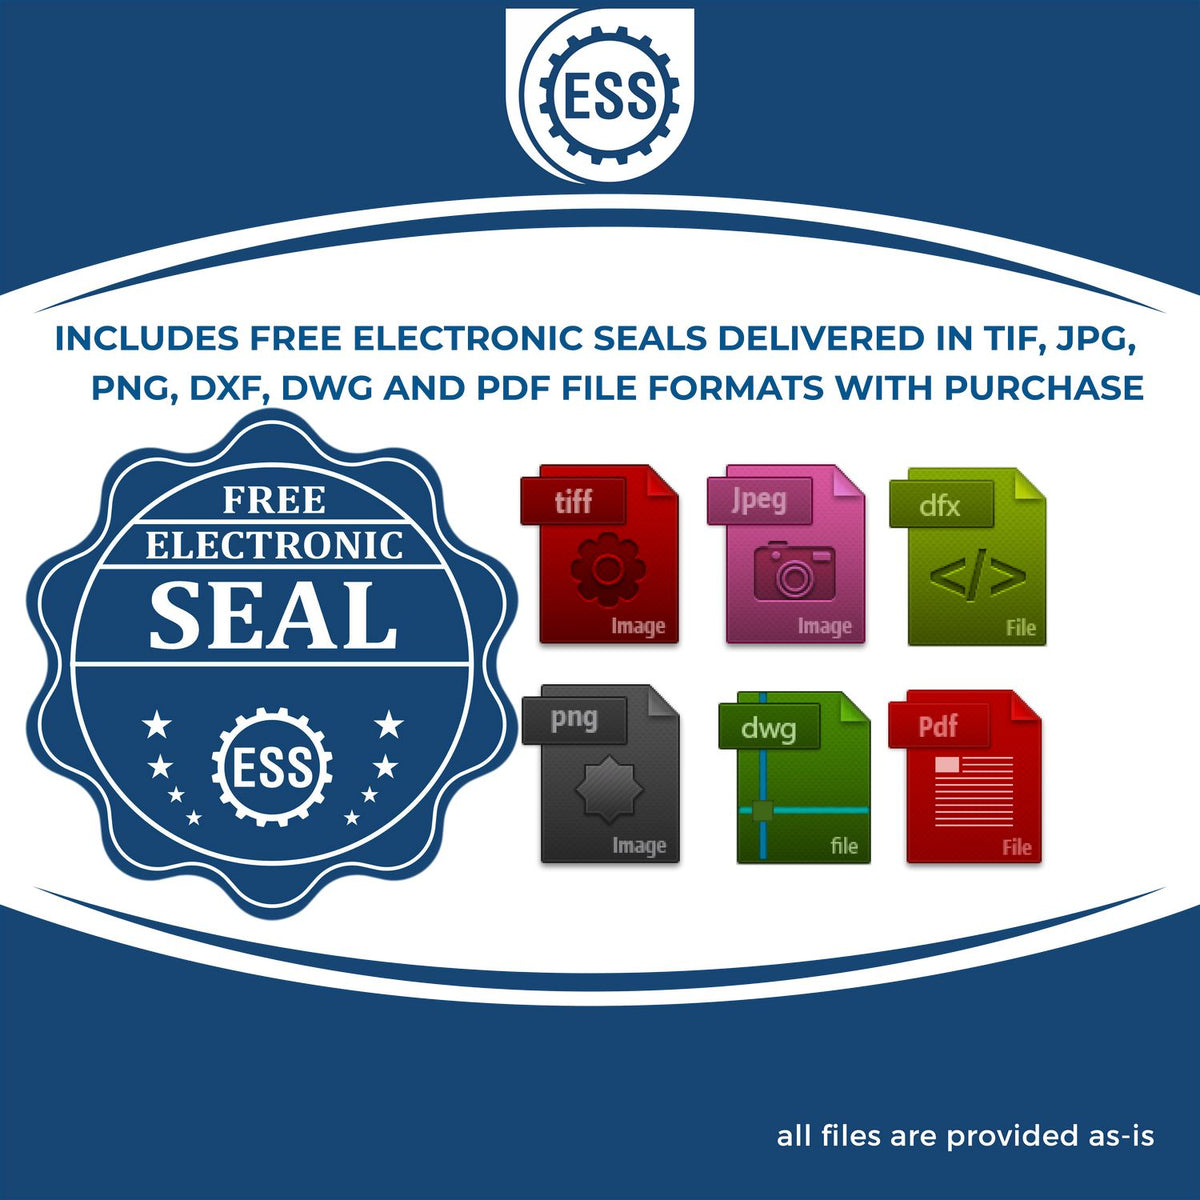 An infographic for the free electronic seal for the Slim Pre-Inked State Seal Notary Stamp for Texas illustrating the different file type icons such as DXF, DWG, TIF, JPG and PNG.